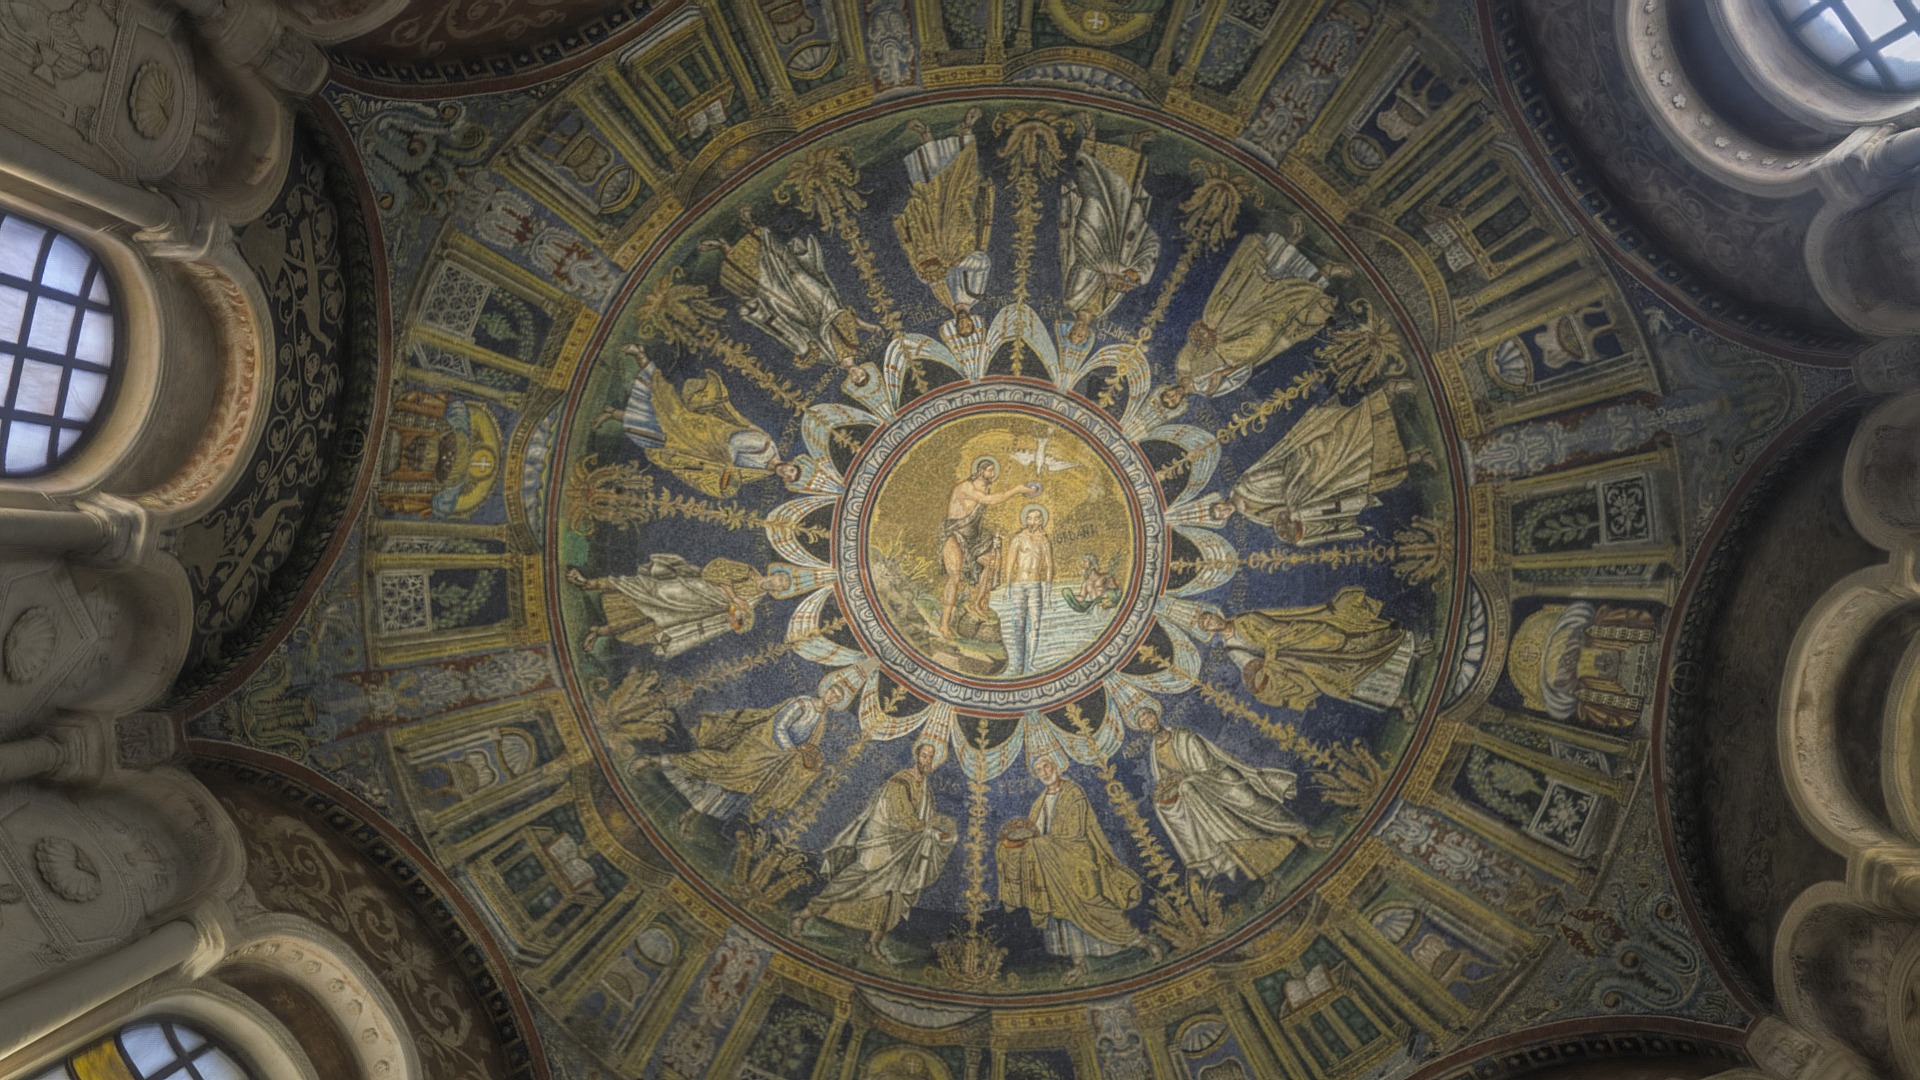 3D model 2017 Battistero Neoniano - This is a 3D model of the 2017 Battistero Neoniano. The 3D model is about a domed ceiling with a painting on it.